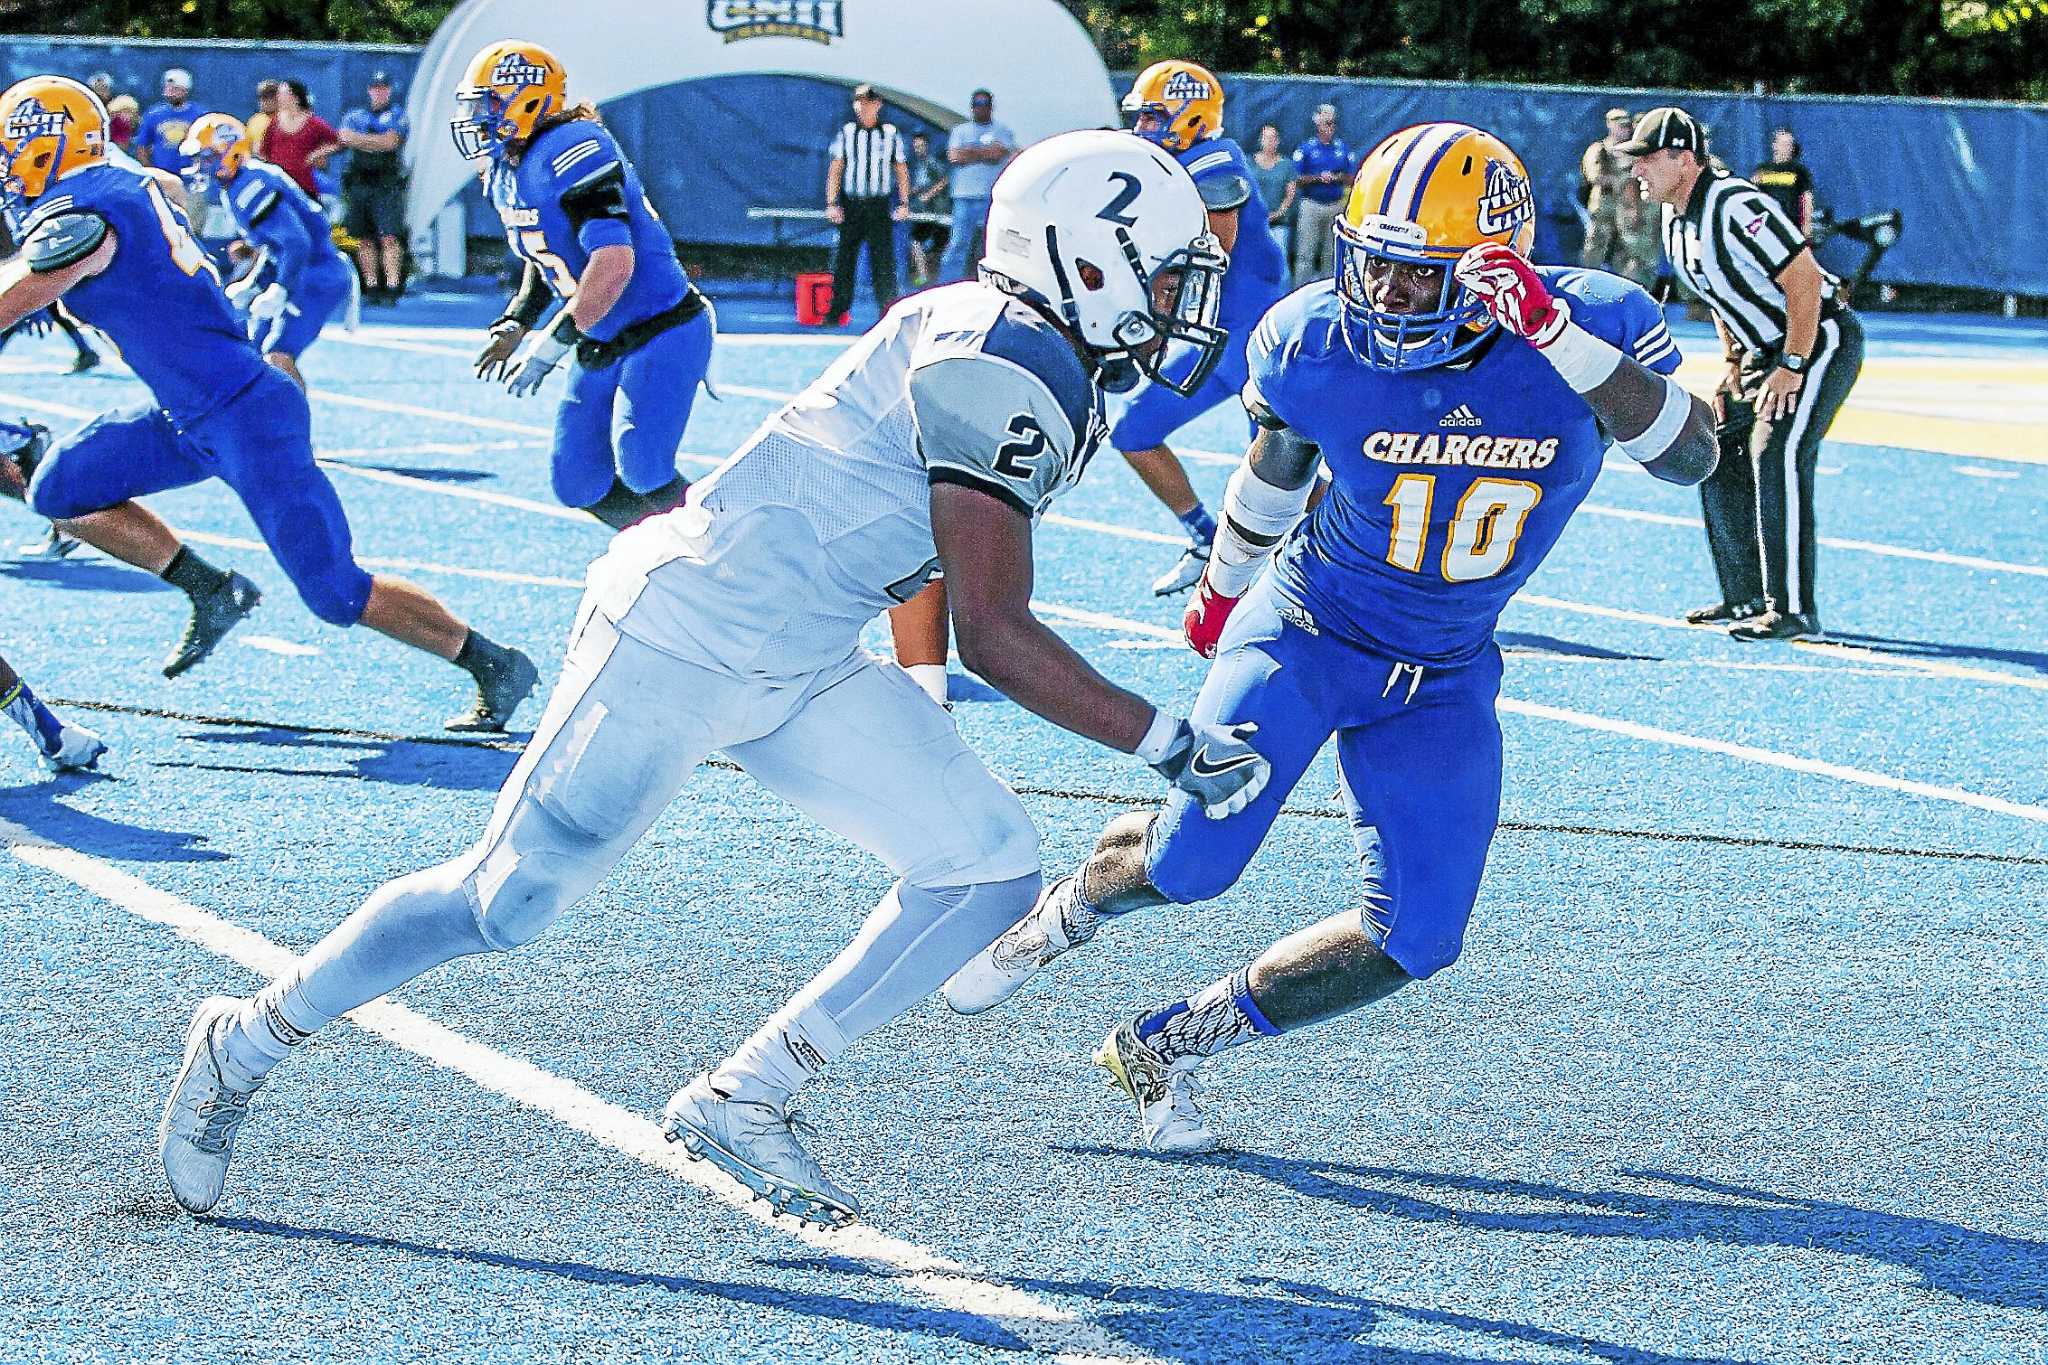 Mark Clements thriving with New Haven football team after battling hardship...